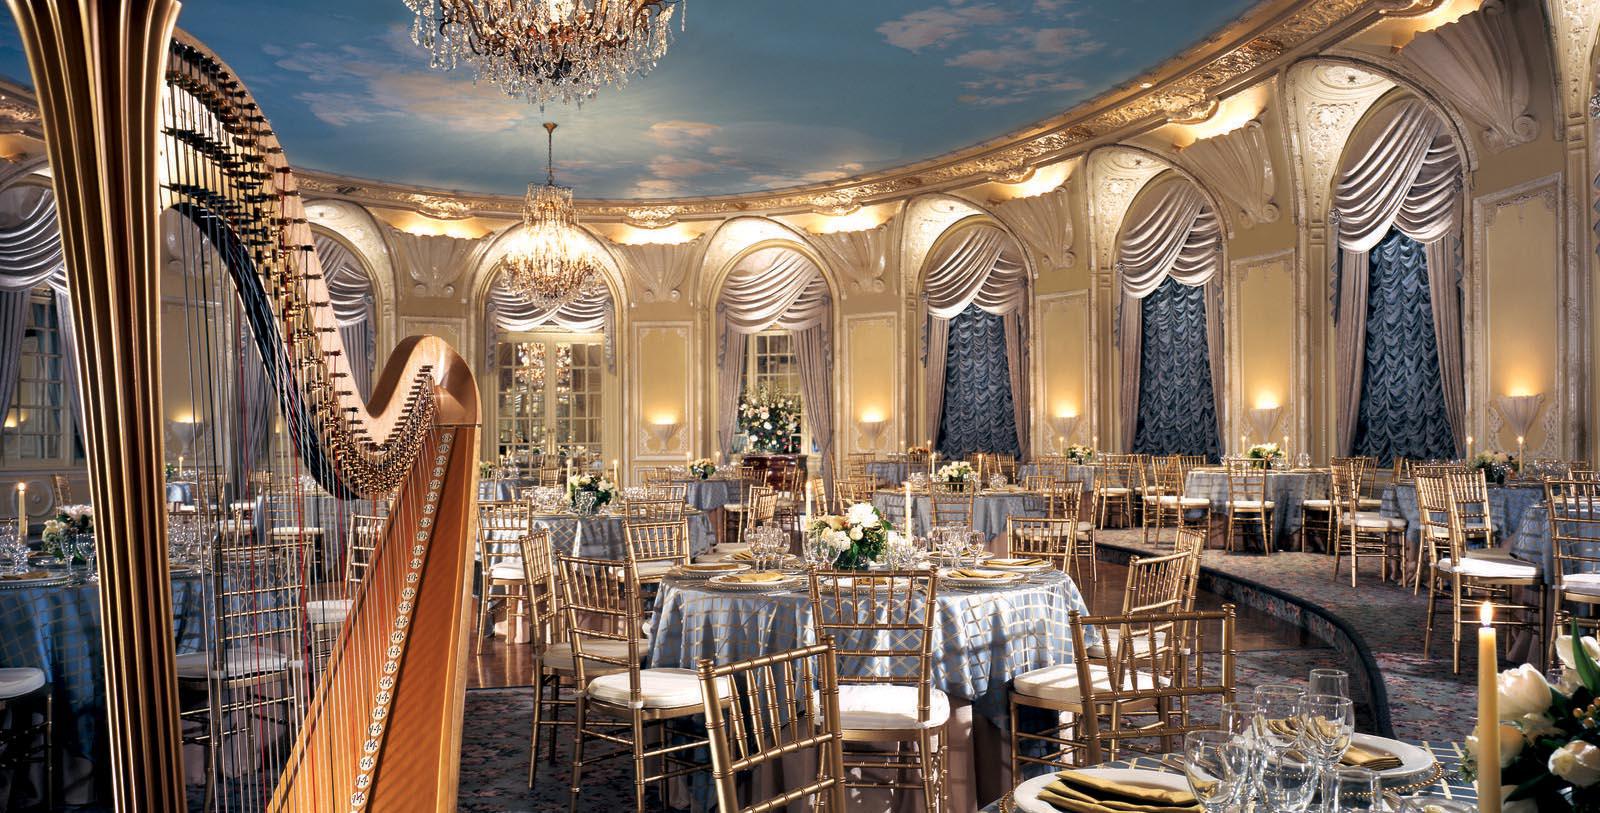 Image of event space set up for wedding at Fairmont Copley Plaza, 1912, Member of Historic Hotels of America, in Boston, Massachusetts, Request For Proposal